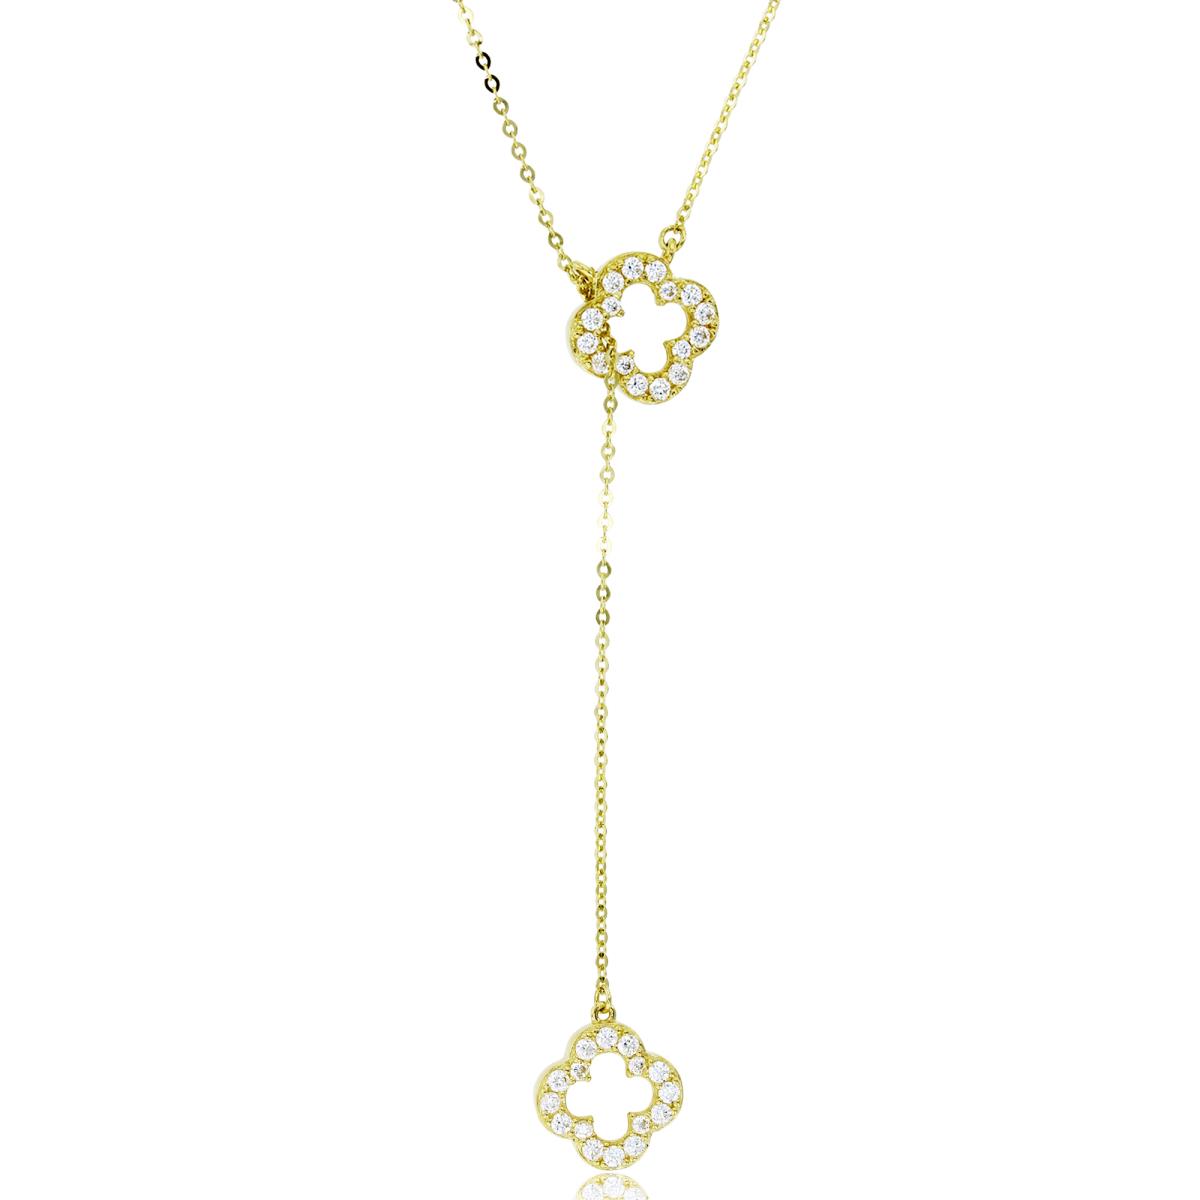 14K Yellow Gold Rnd CZ Double Open Clovers Dangling 17+1"Necklace